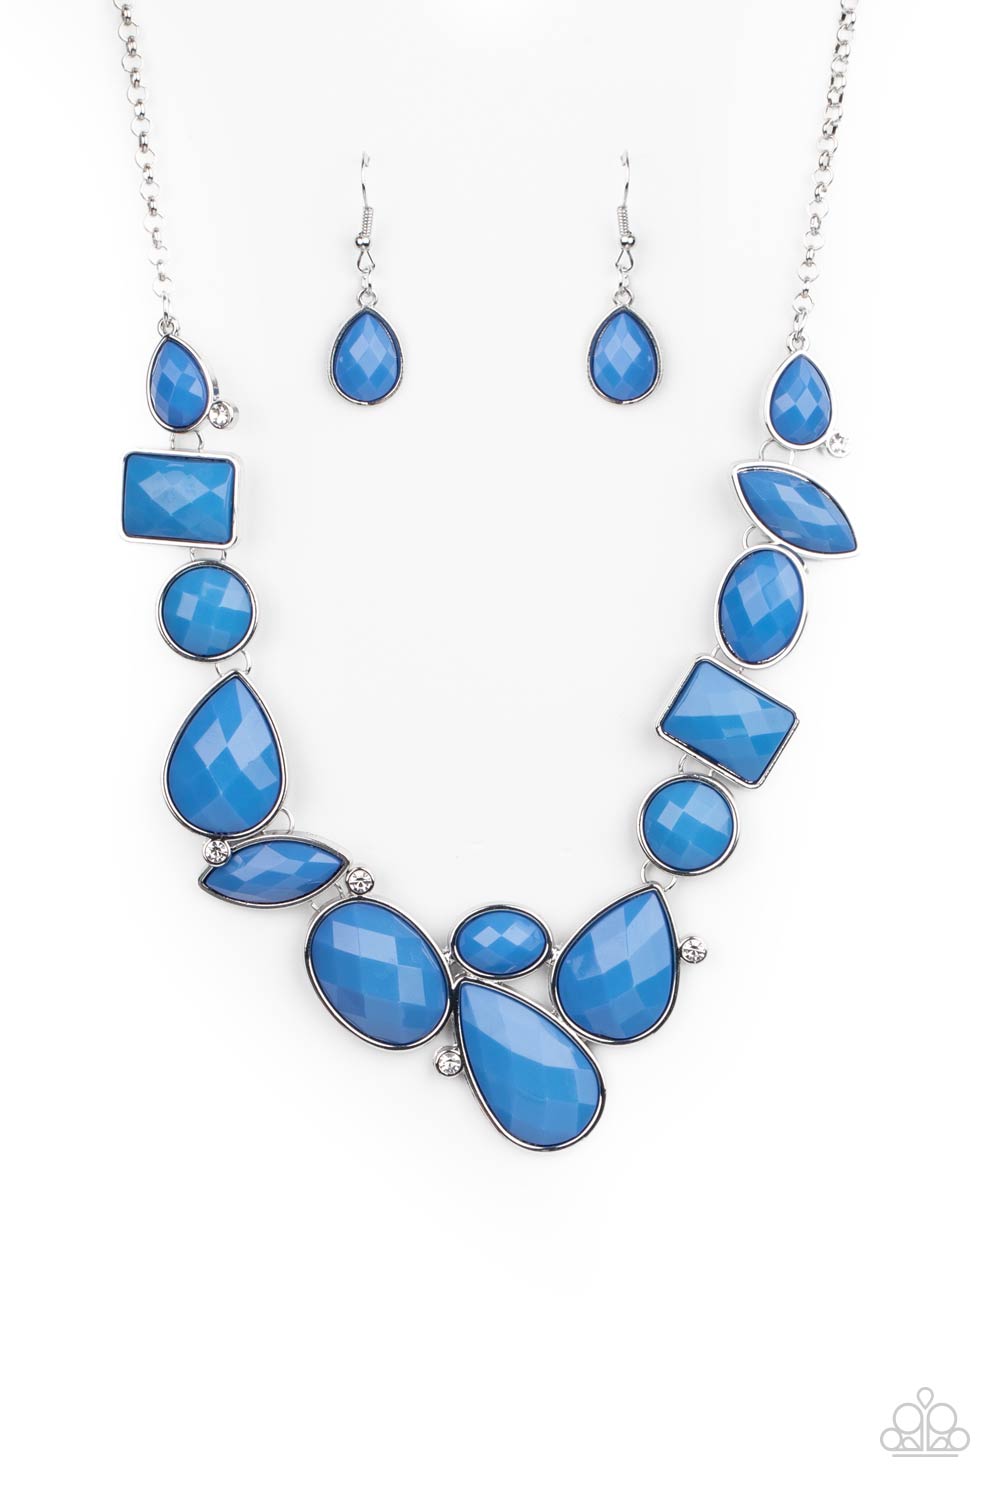 Mystical Mirage Blue Necklace- Paparazzi Accessories  Featuring the vibrant hue of French Blue, mismatched teardrop, rectangular, and round beaded frames delicately link below the collar. Hints of glassy white rhinestones are scattered throughout the display, adding a dash of refinement to the colorful statement piece. Features an adjustable clasp closure.  Sold as one individual necklace. Includes one pair of matching earrings.